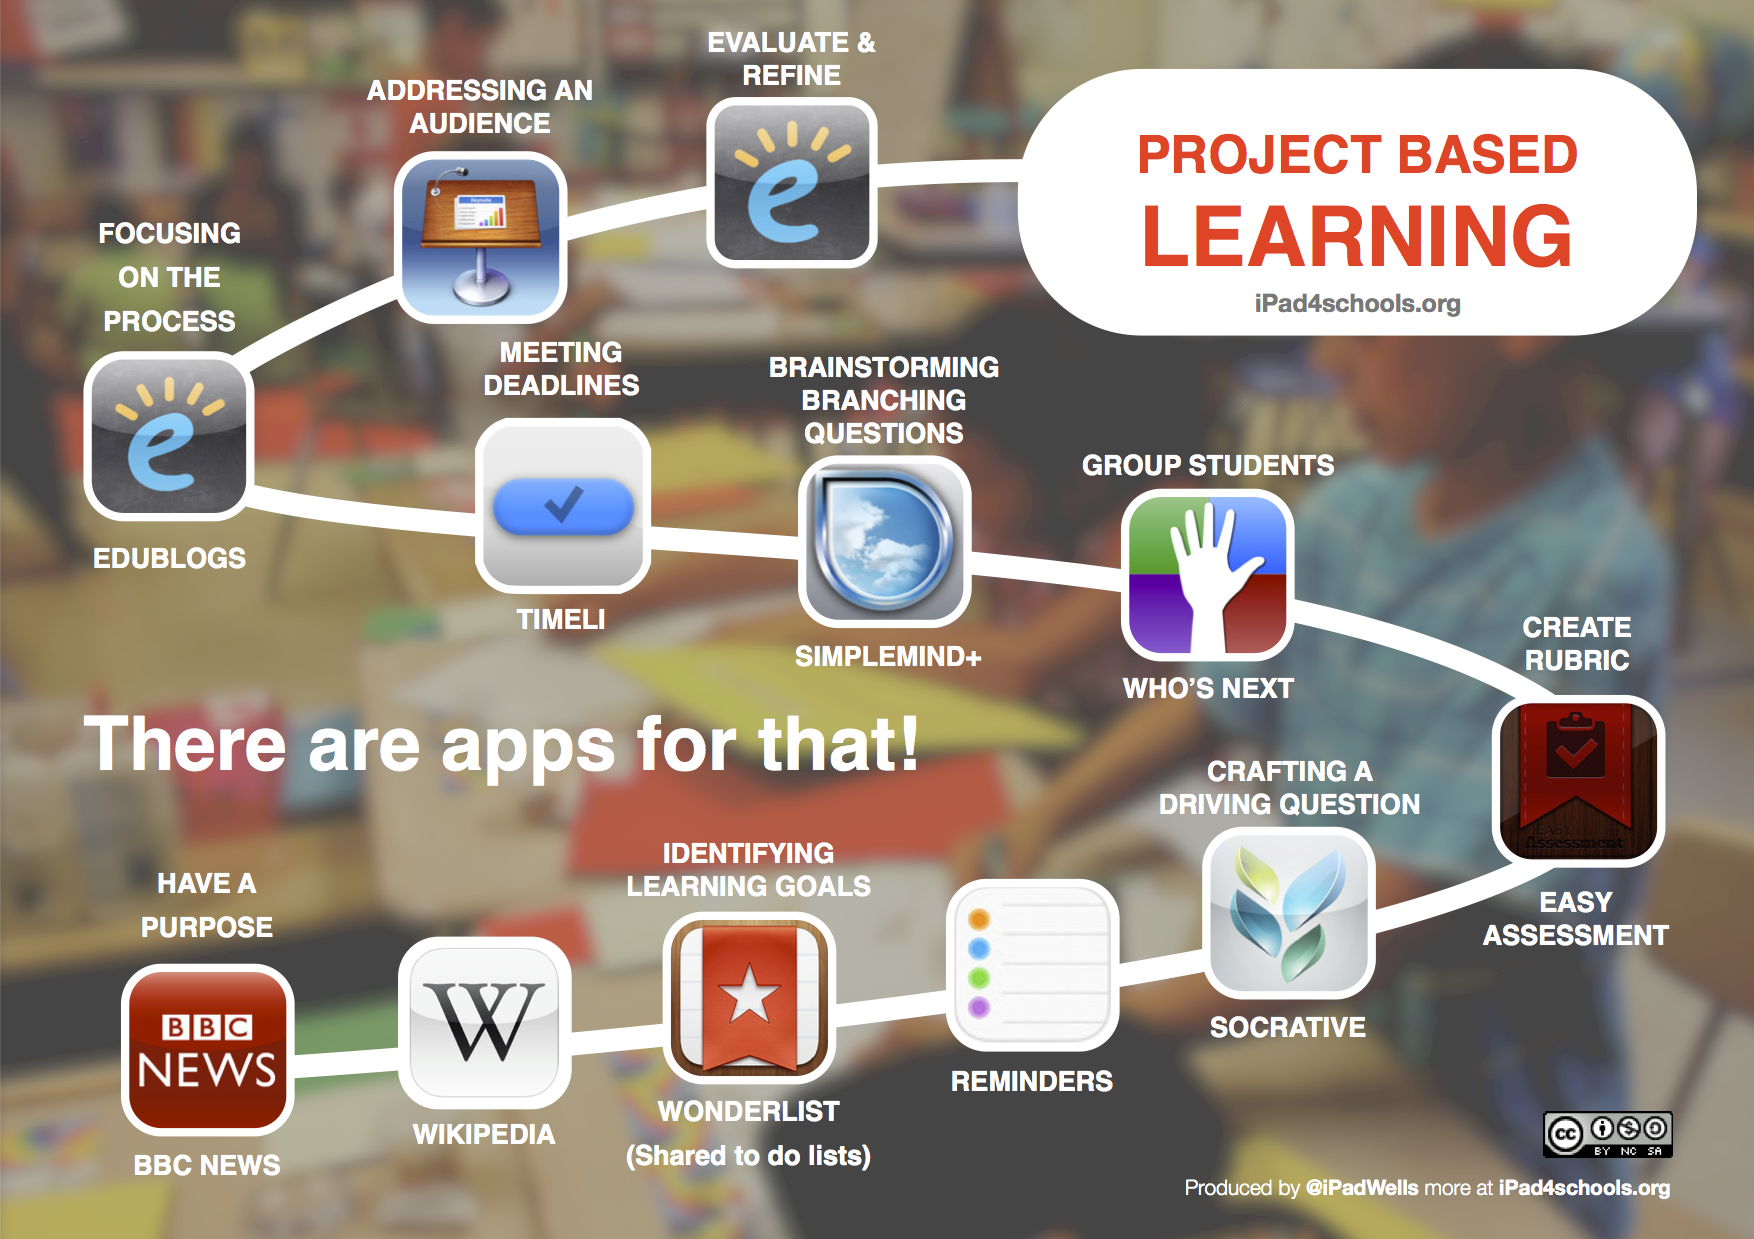 Project Based Learning with iPads – EDUWELLS1754 x 1239